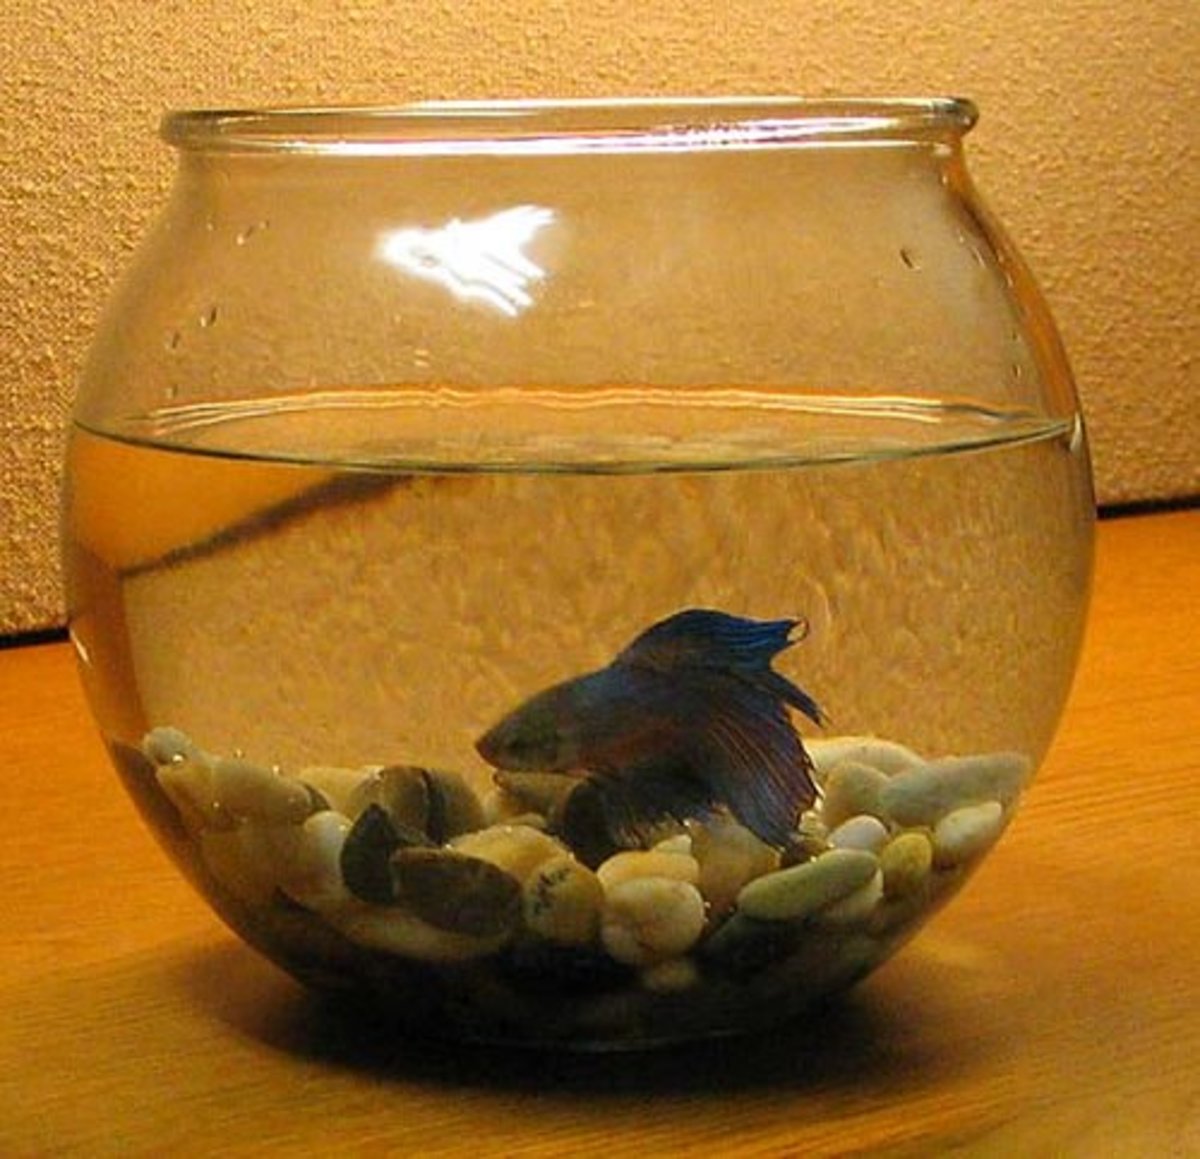 Why Fish Bowls Are Bad for Your Fish | PetHelpful